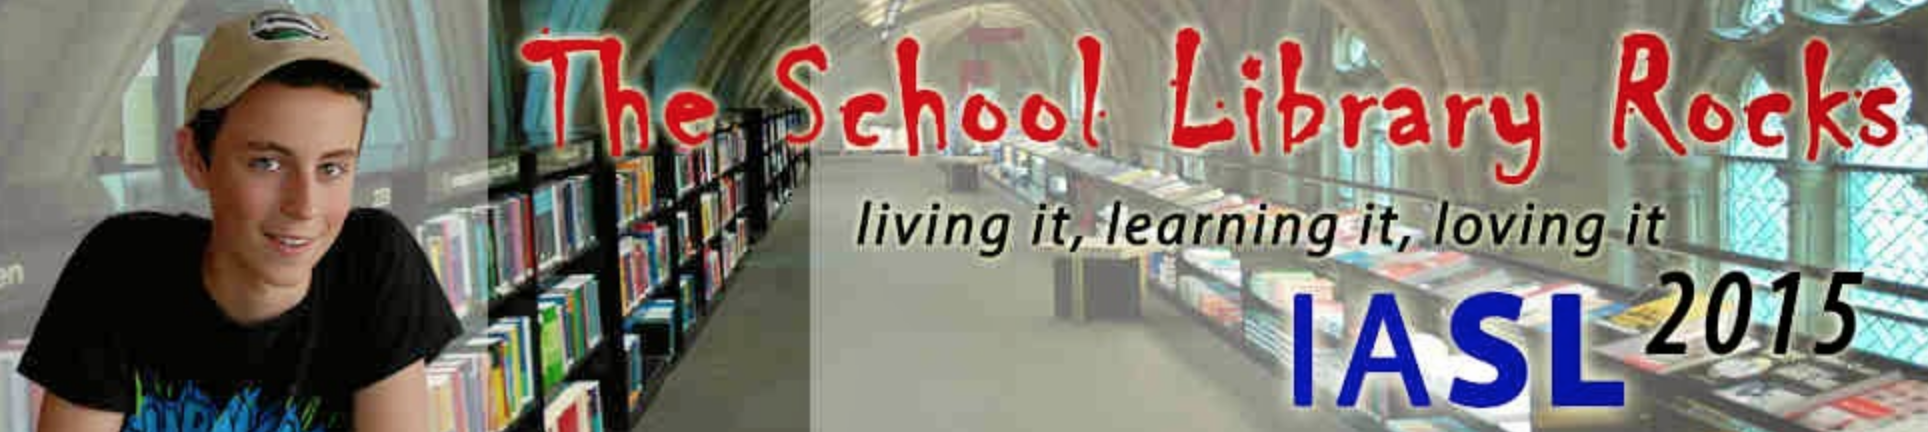 					View 2015: IASL Conference Proceedings (Maastricht, Netherlands): The School Library Rocks: Living it, Learning it, Loving it
				